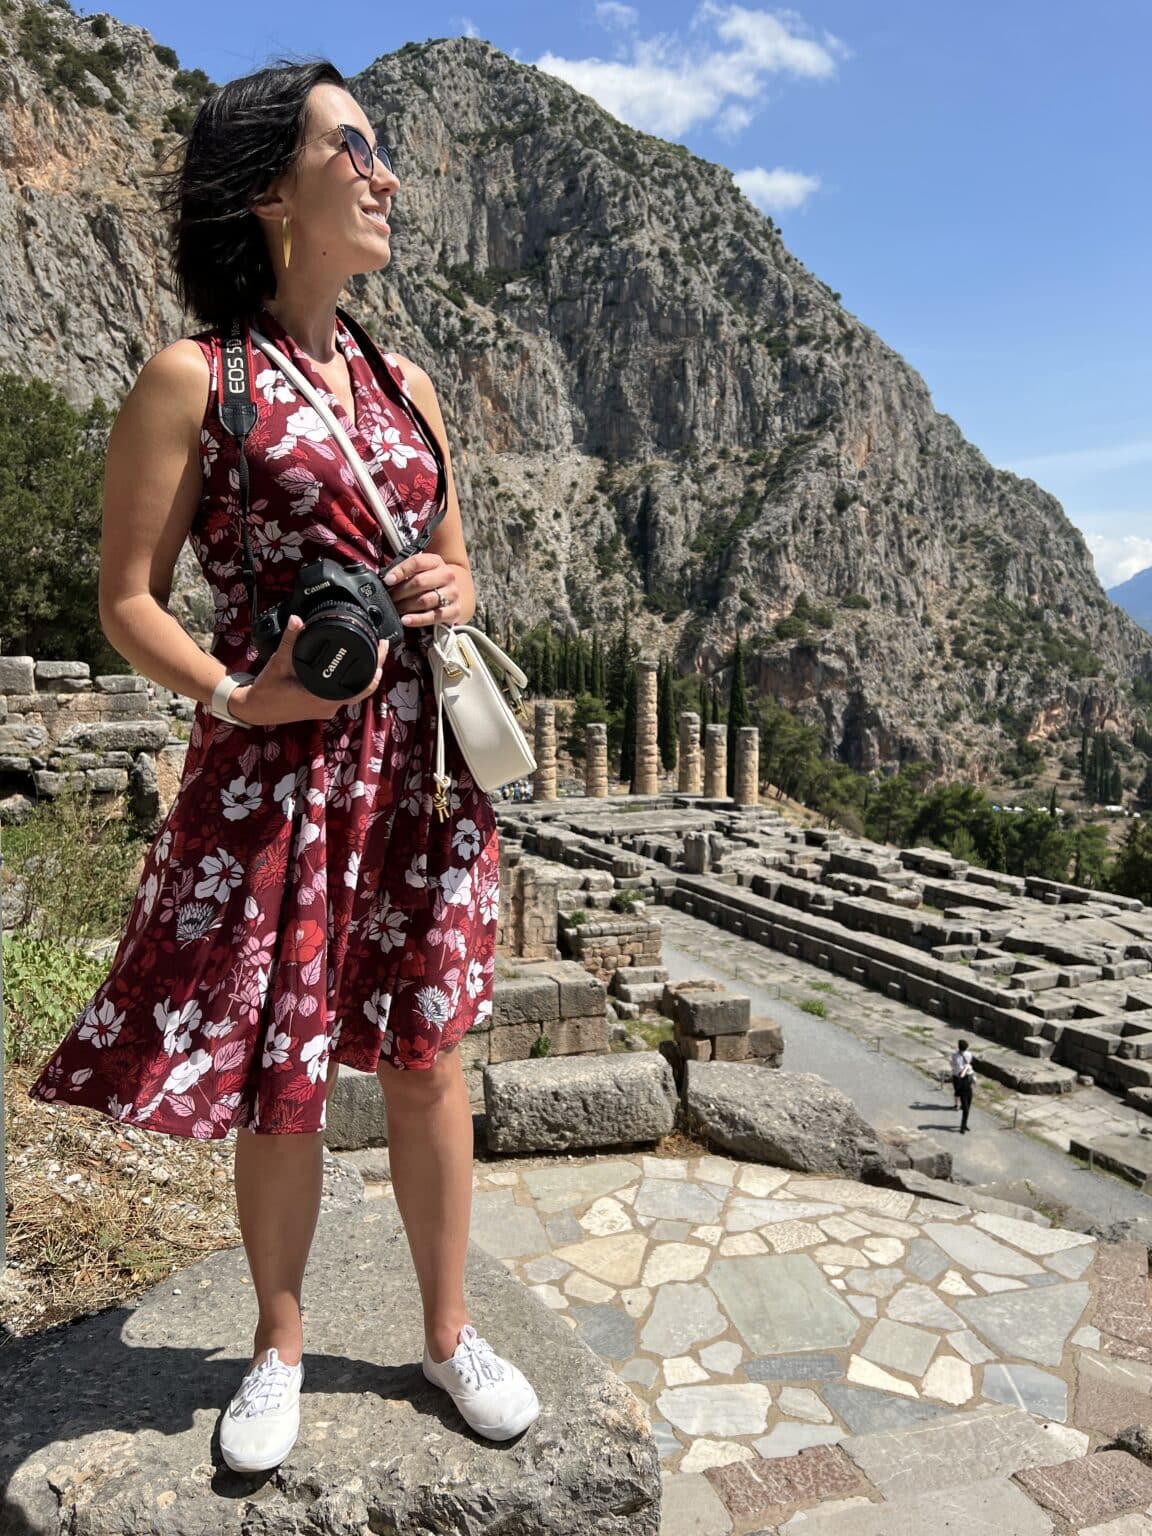 Lindsey wearing a floral Karina dress and white keds in Delphi Greece